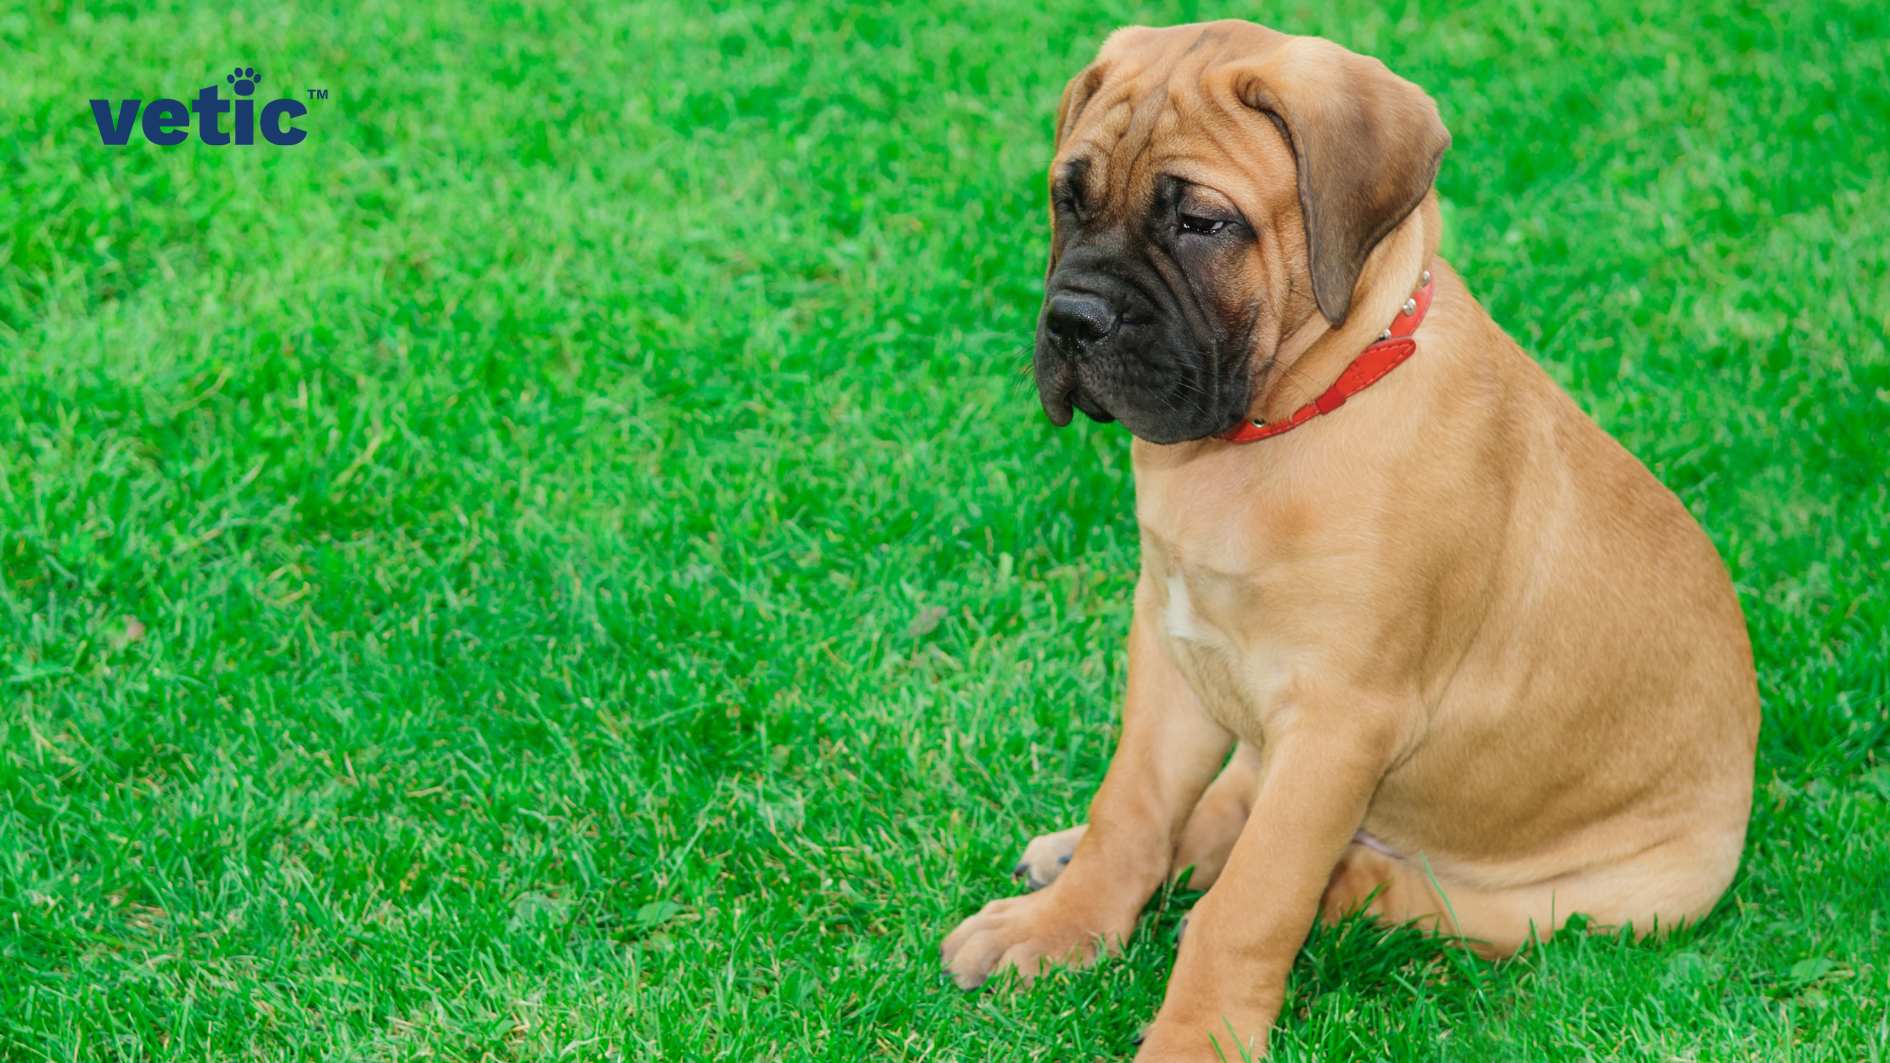 A solemn looking bullmastiff puppy wearing a bright red collar sitting on the fresh green grass. The photo has a "Vetic" logo on the upper left corner. If you want to adopt a bullmastiff in India ensure you are adopting from an ethical breeder or shelter.